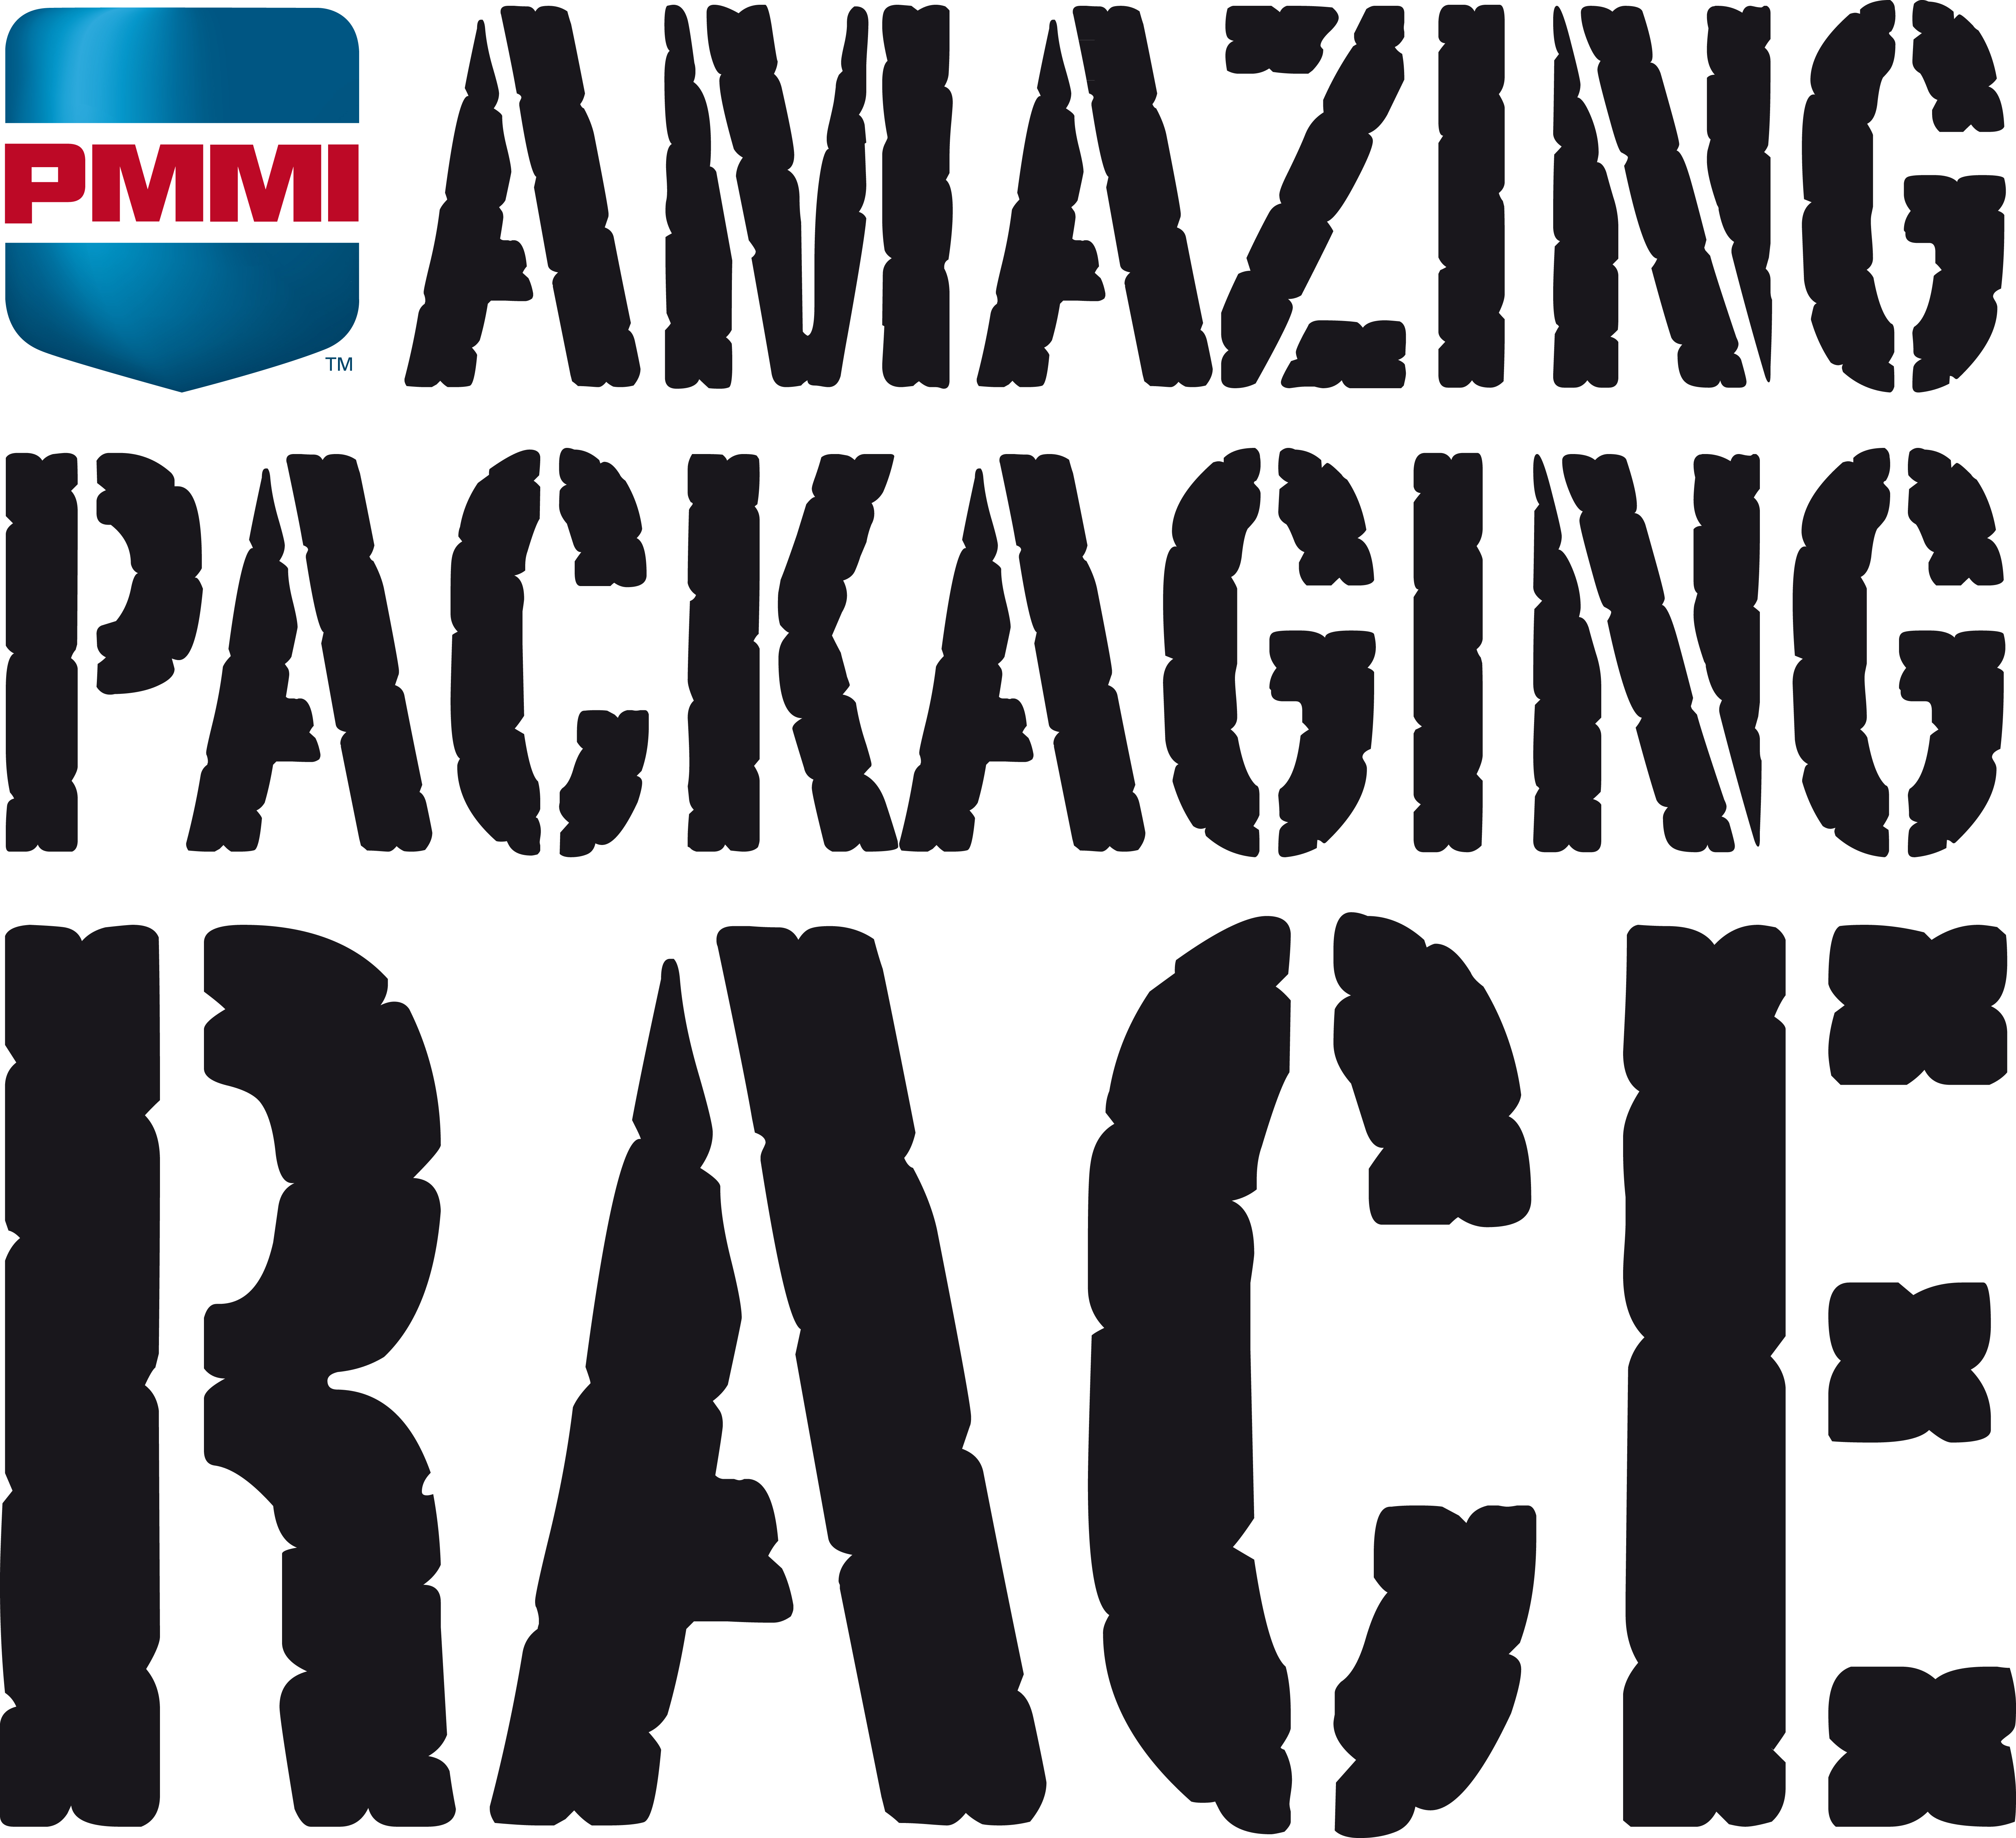 Amazing Packaging Race